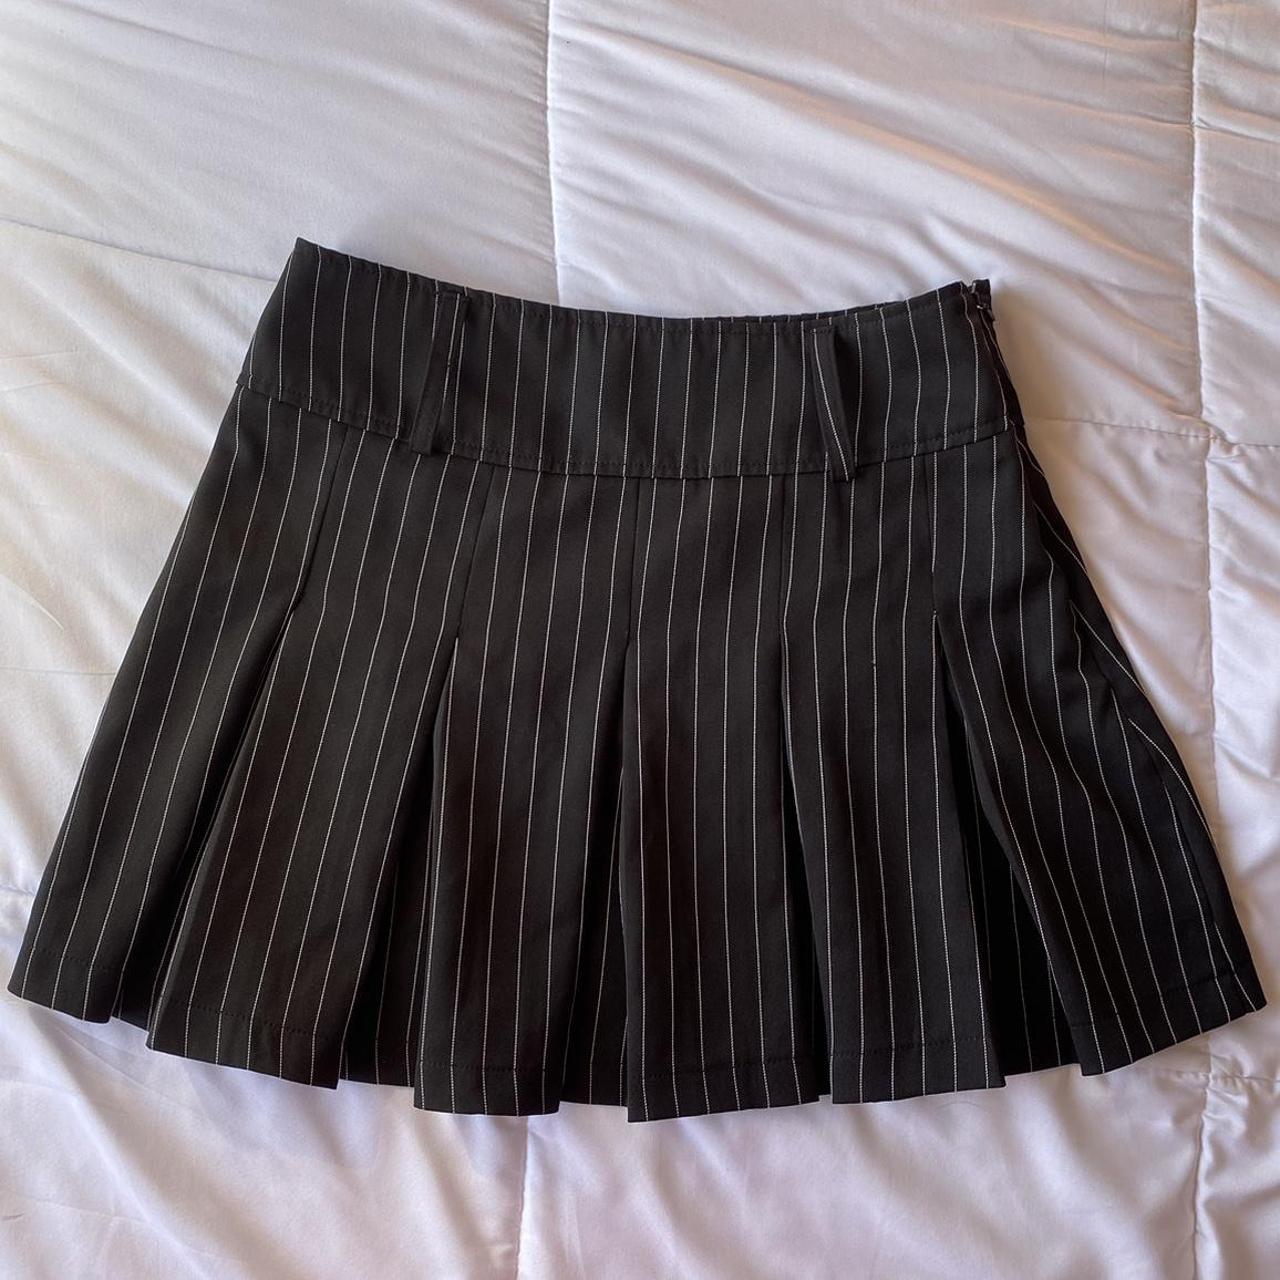 Striped Black and white Mini Skirt 🖤 Bought from... - Depop